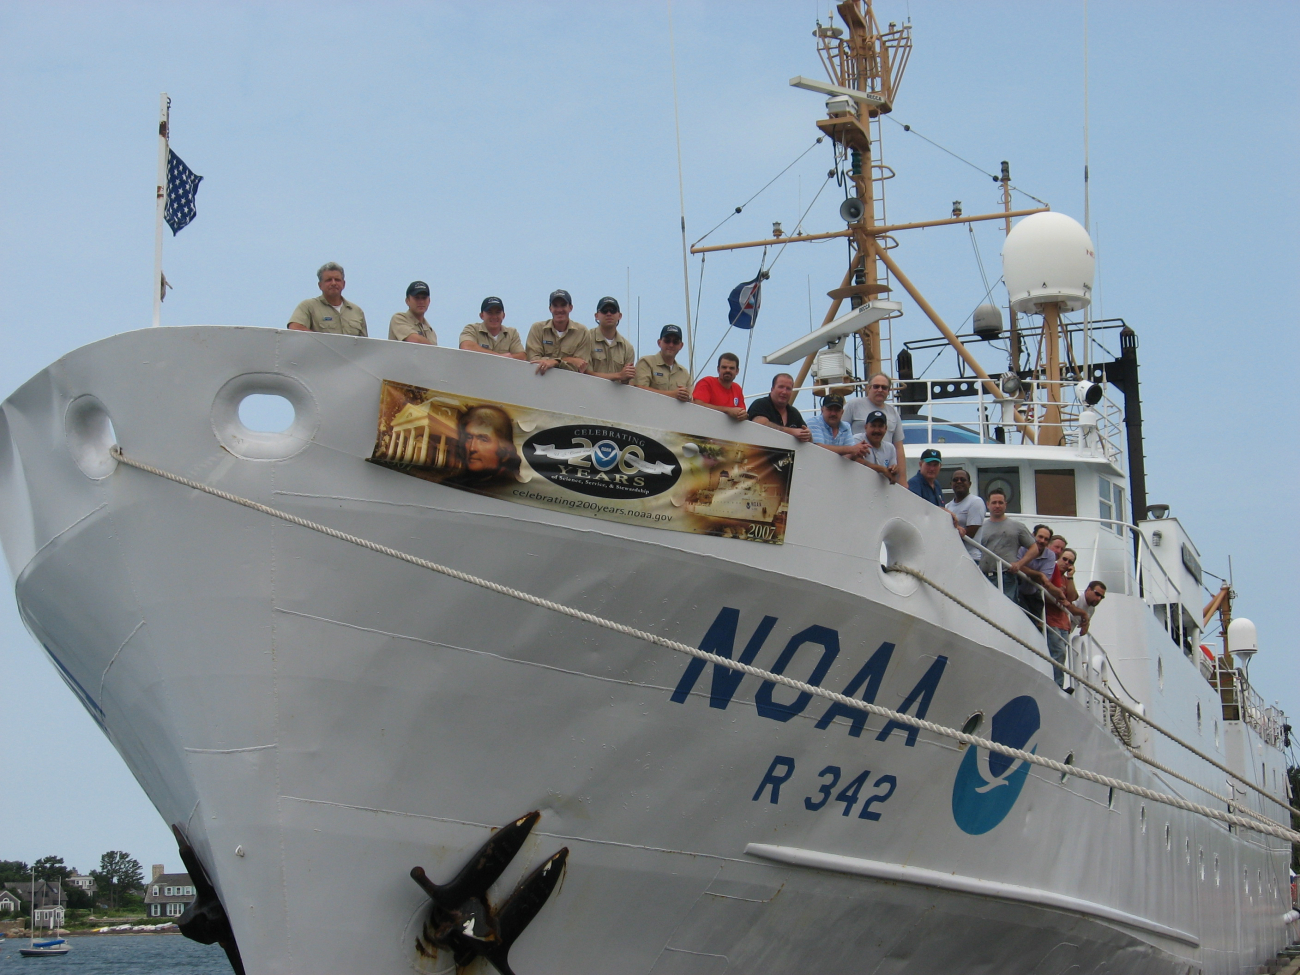 The Officers and Crew of NOAA Ship ALBATROSS IV wish all of NOAA a happy200 Years of Science and Service to our Nation